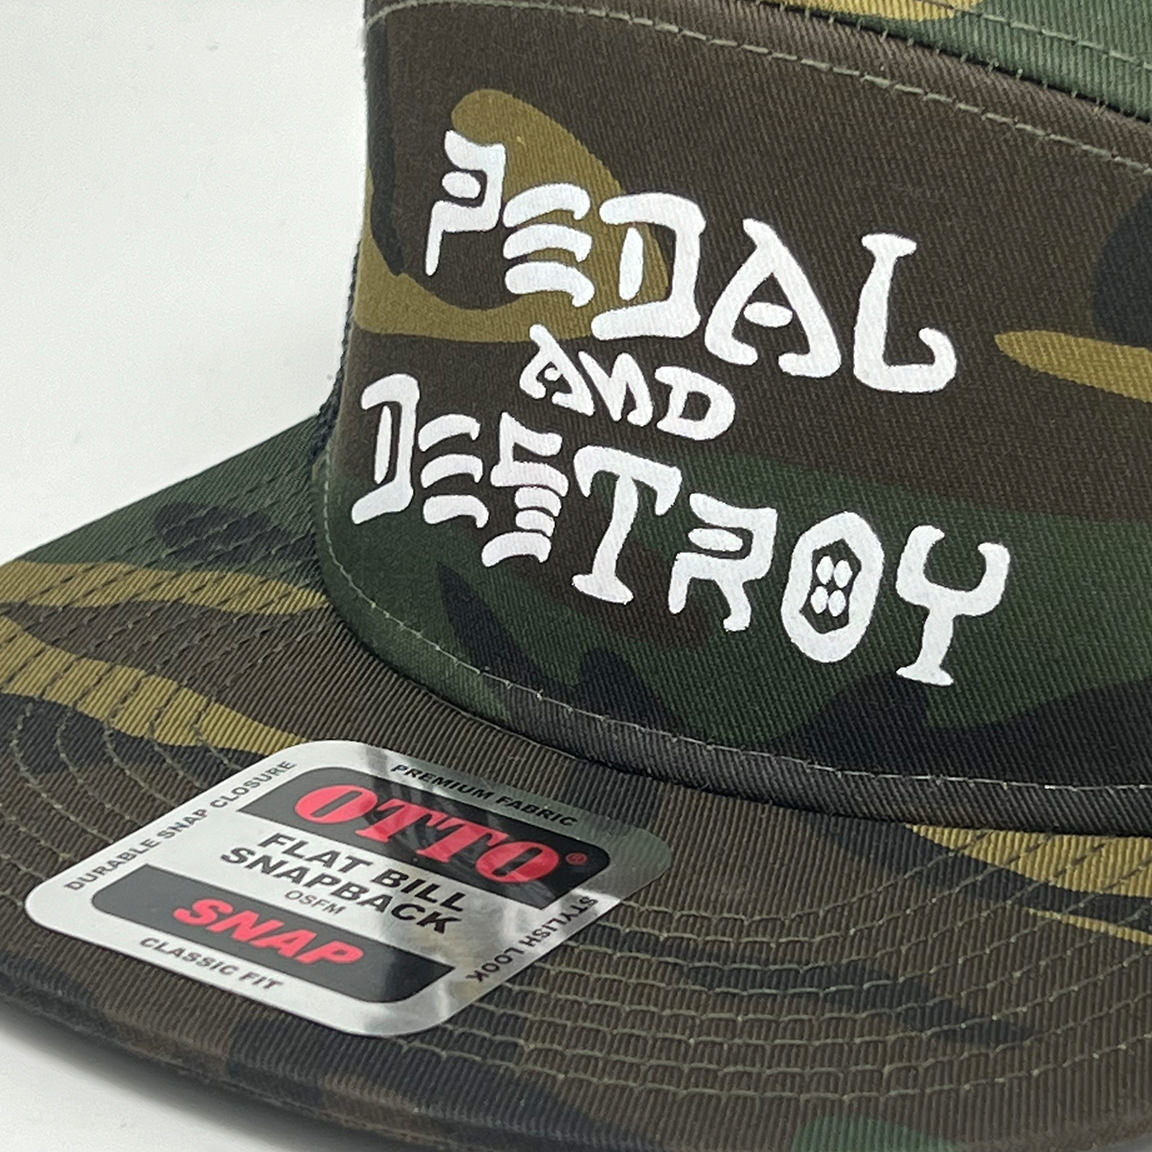 Pedal and Destroy Trucker Hat